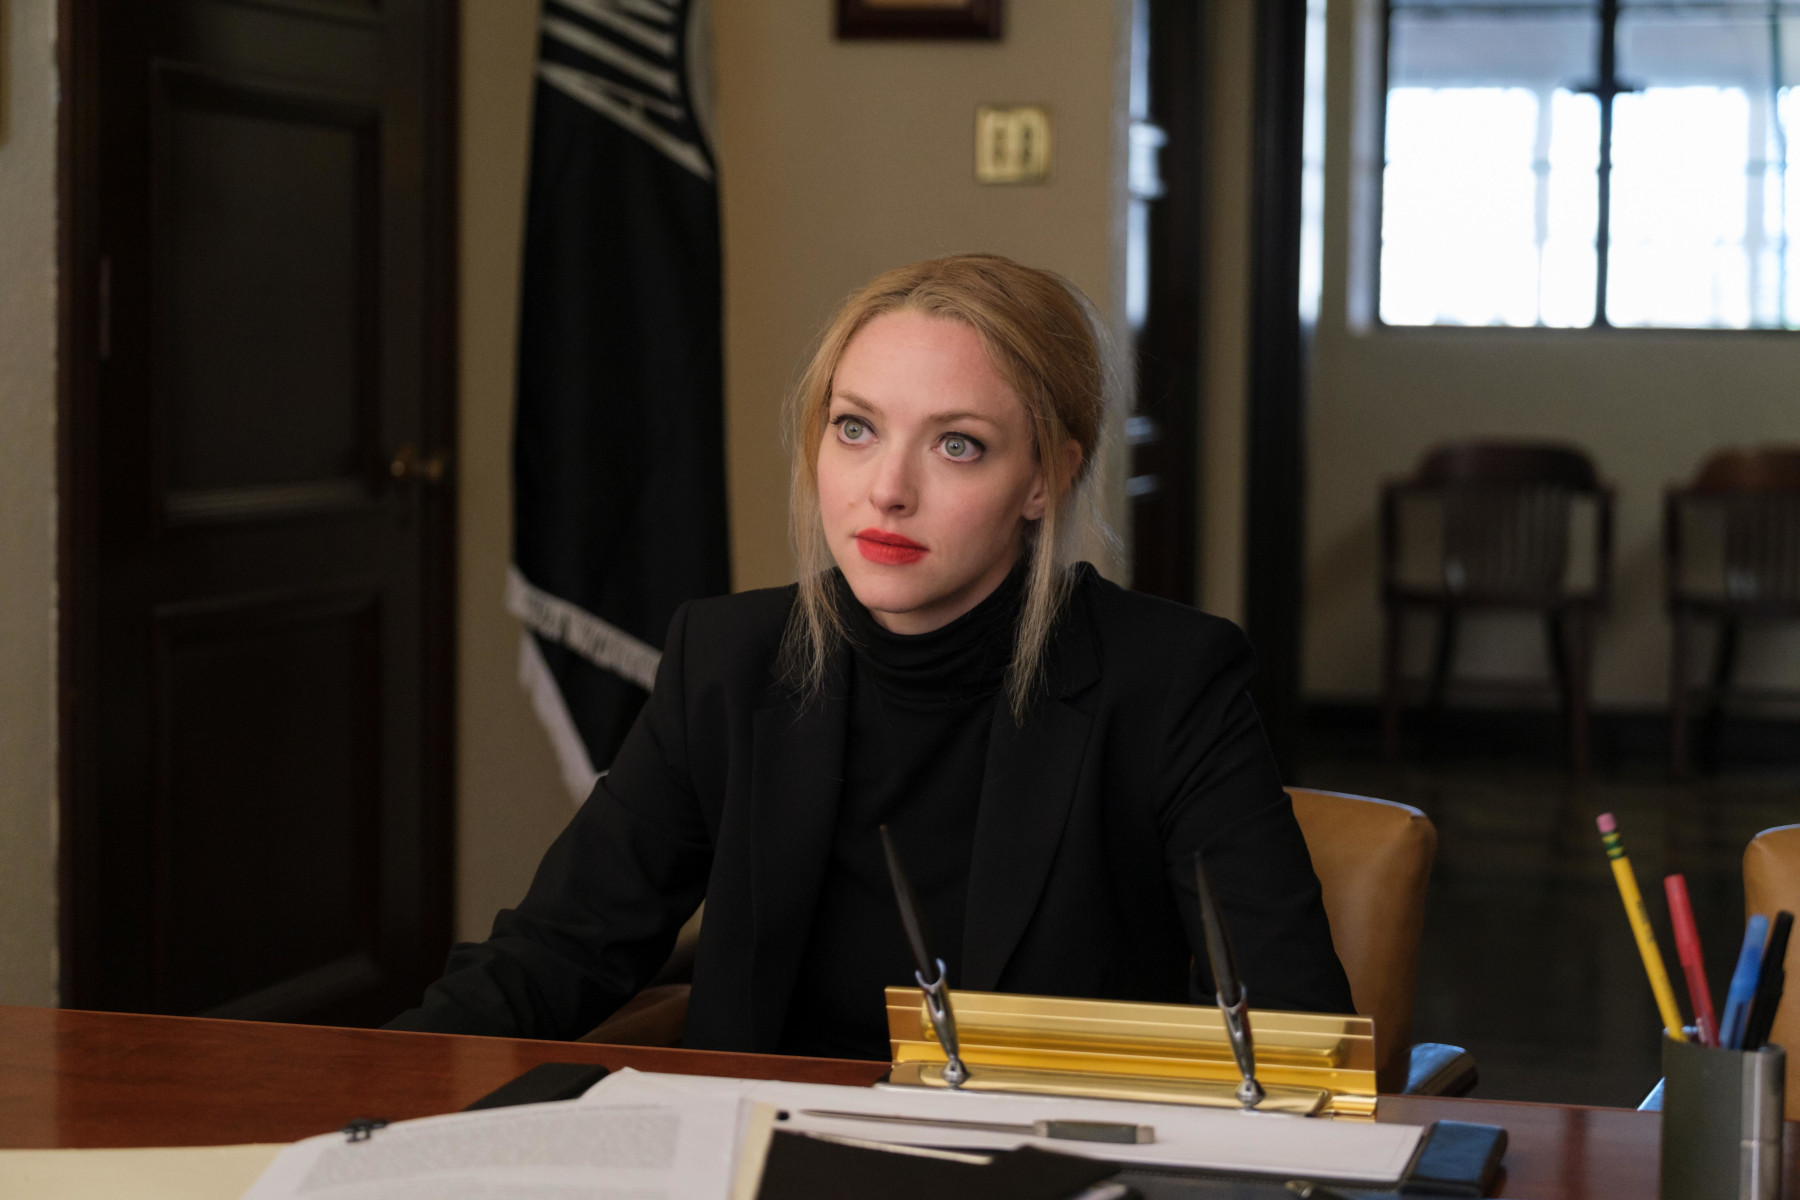 Amanda Seyfried in 'The Dropout' Episode 4 on Hulu. She's wearing a black shirt, red lipstick, and her hair is pulled back. She's sitting in front of a desk.